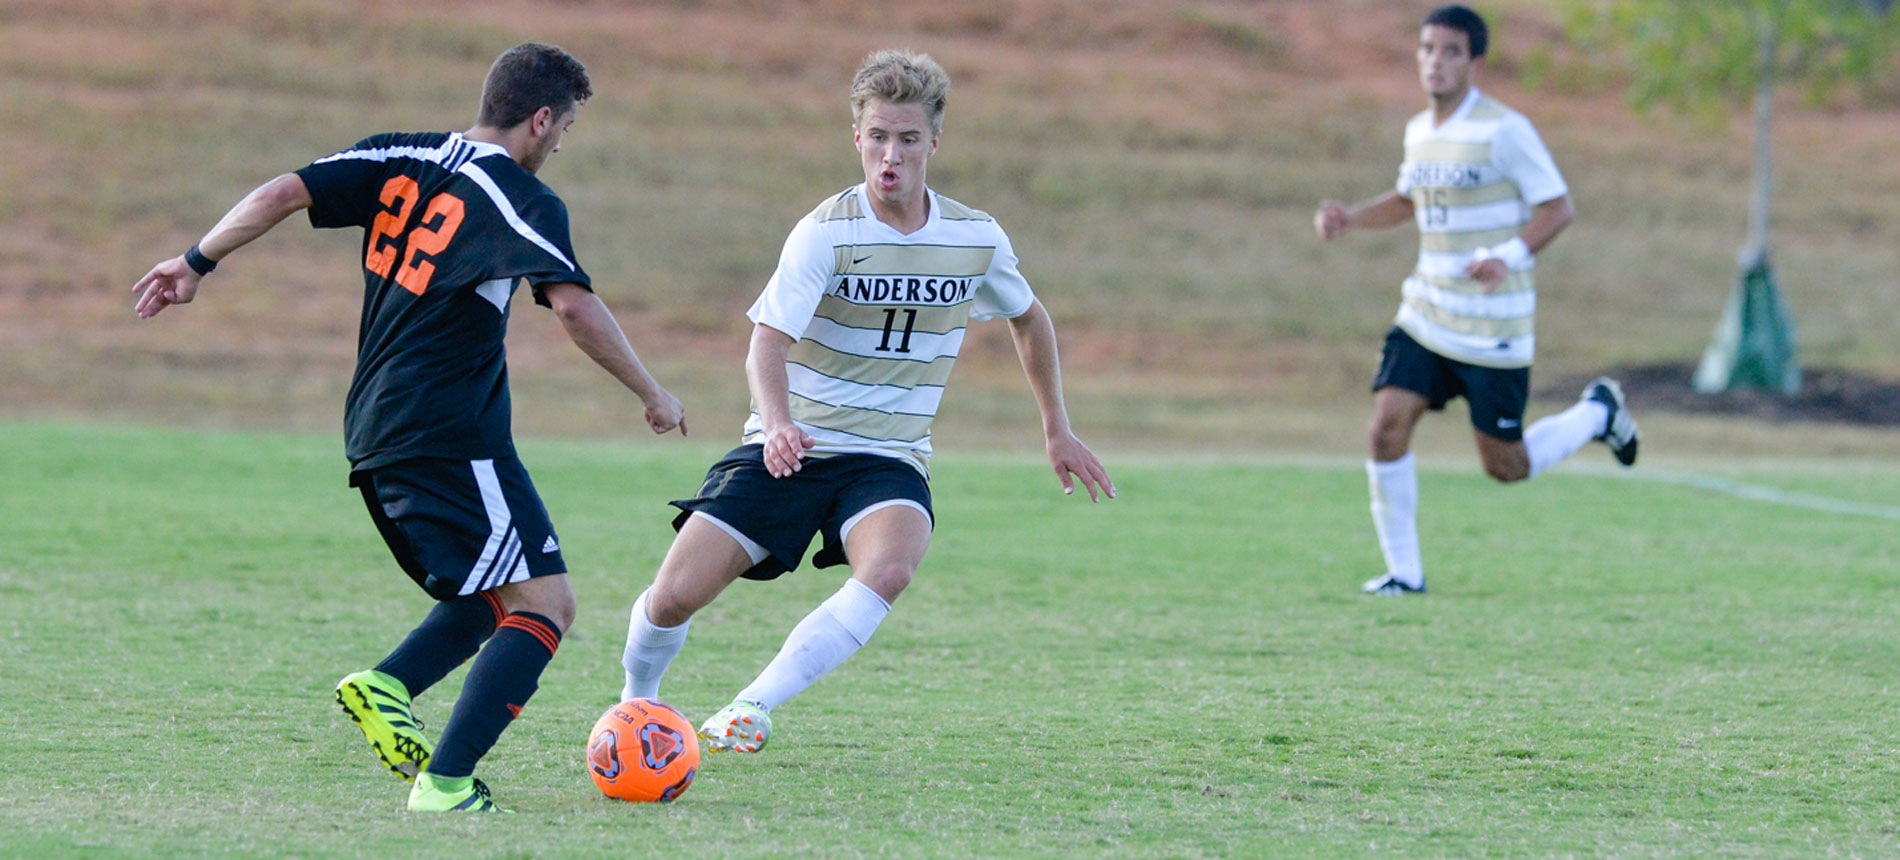 Trojans Fall in Double Overtime at Carson-Newman; 2-1